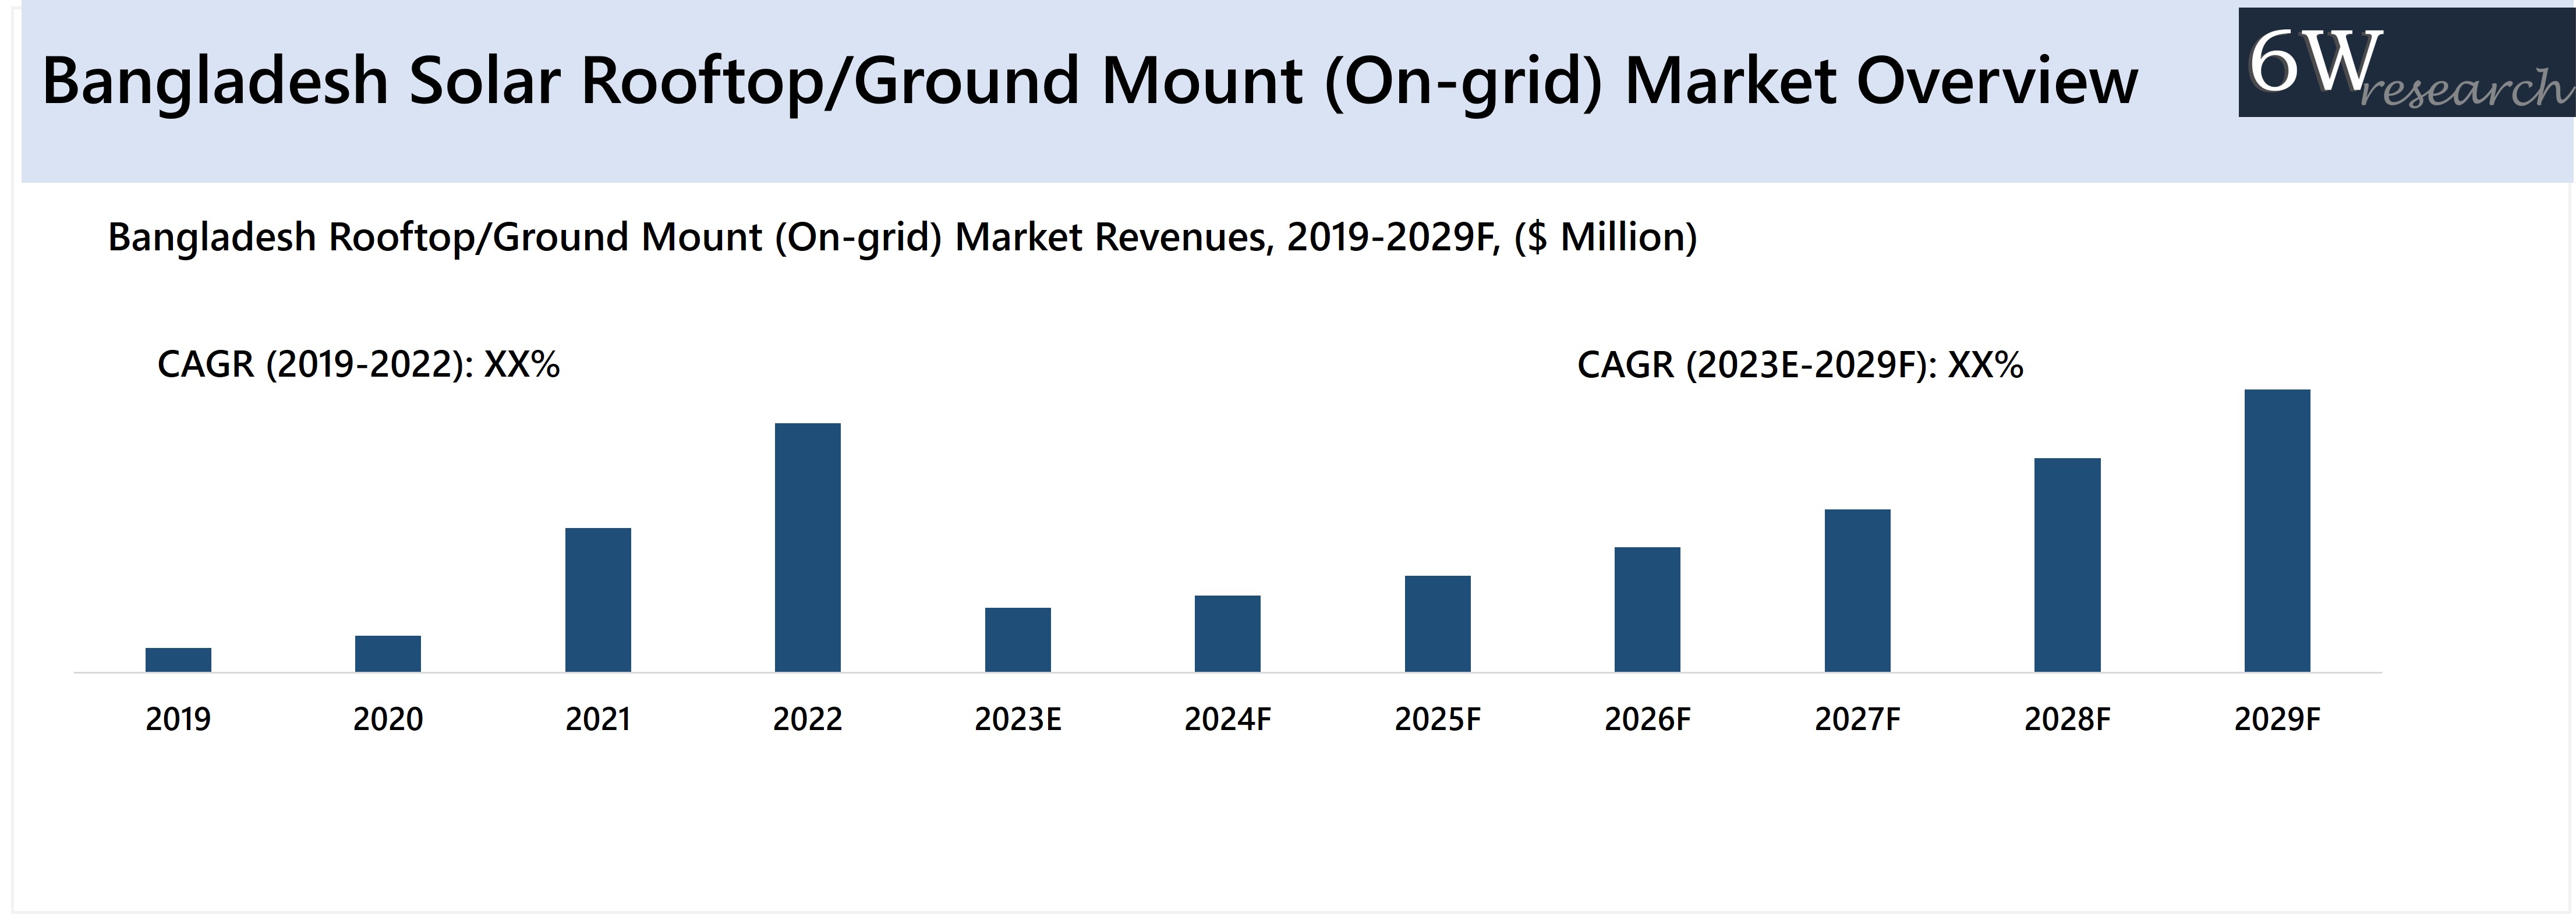 Bangladesh Solar Rooftop Ground Mount (On-grid) Market Overview